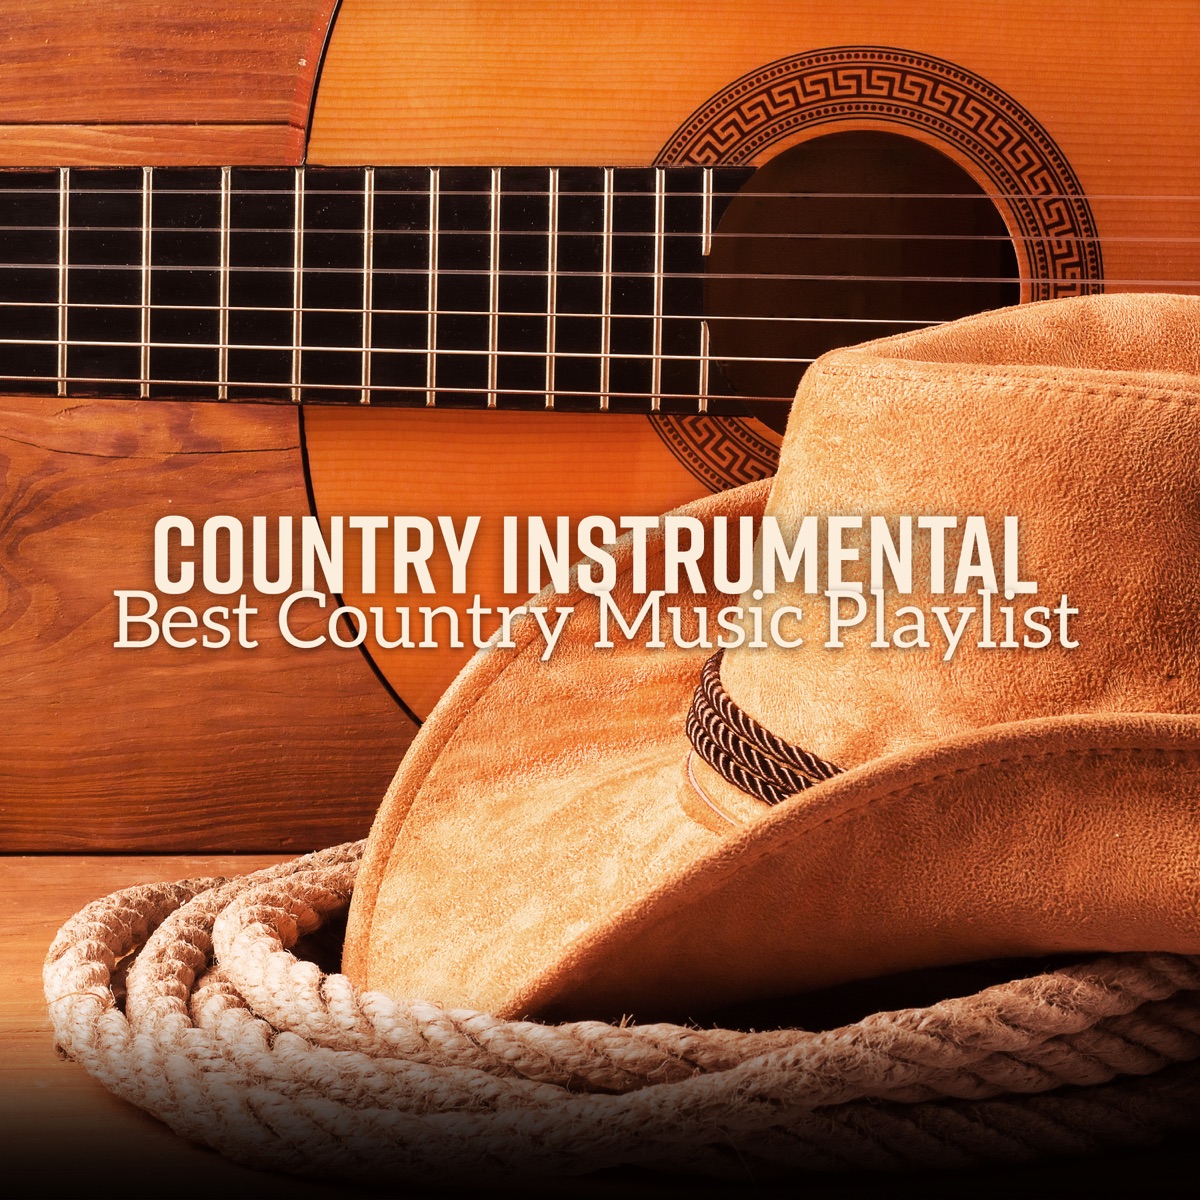 Country Instrumental - Best Country Music Playlist by Acoustic Country Band  on Apple Music